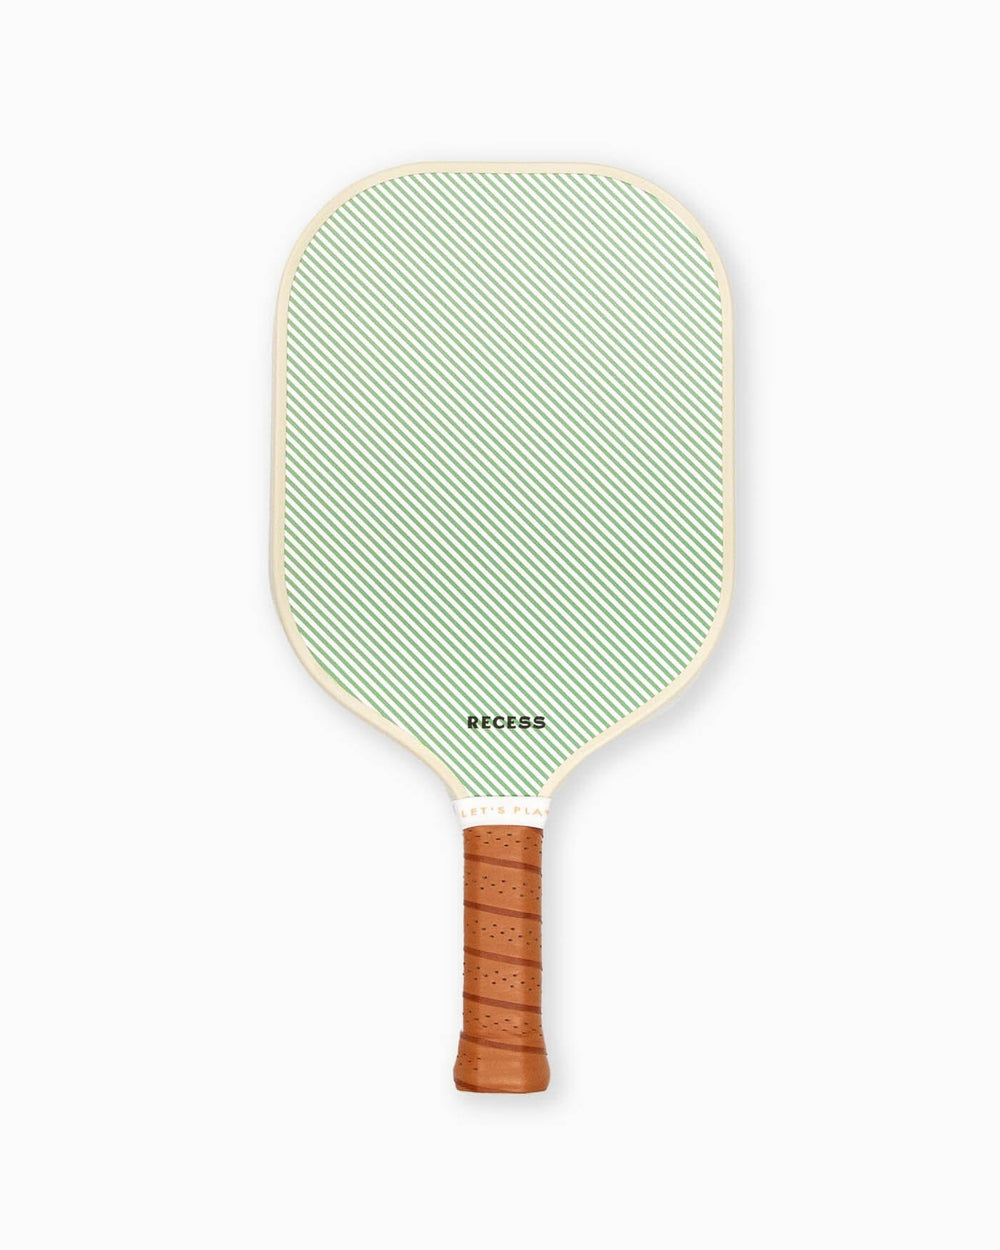 The back view of the Southern Tide Recess + Southern Tide Skipjack Stripe Pickleball Paddle by Southern Tide - Kelly Green